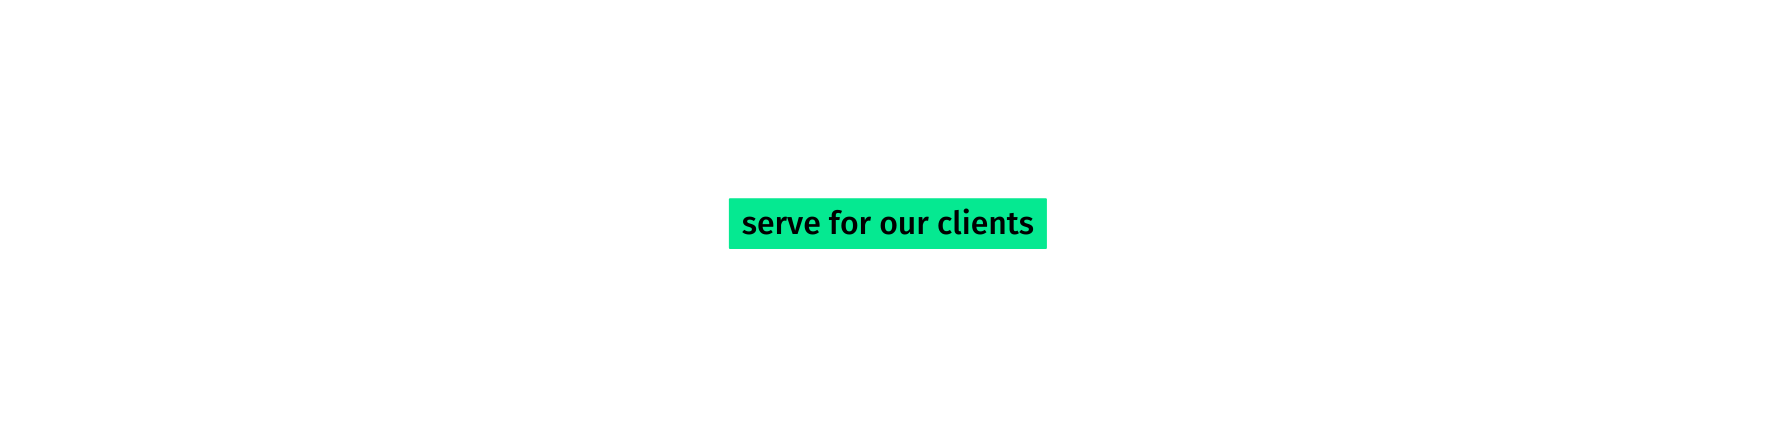 serve for our clients